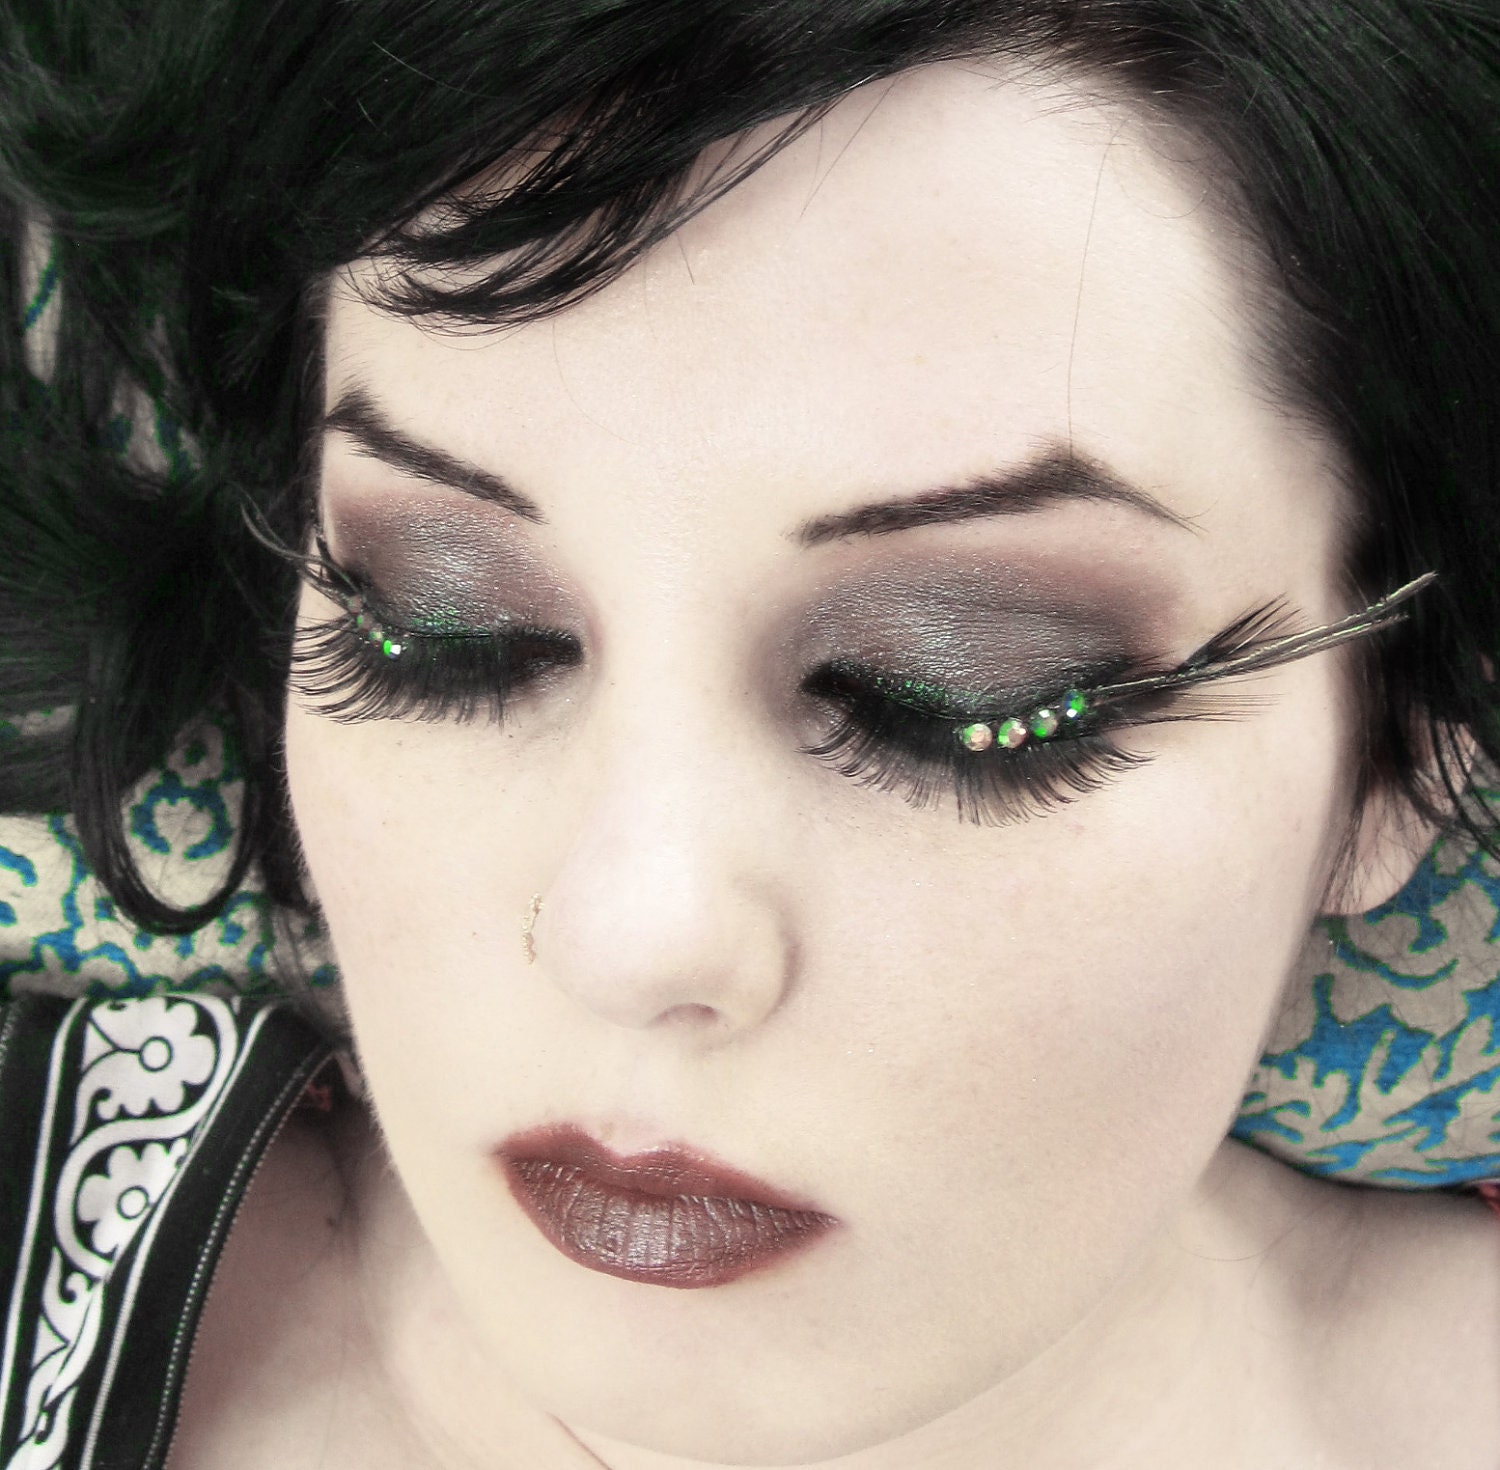 Absinthe - Iridescent Green & Gold Peacock Feather Eyelashes w/ Swarovski Crystals - By Moonshine Baby